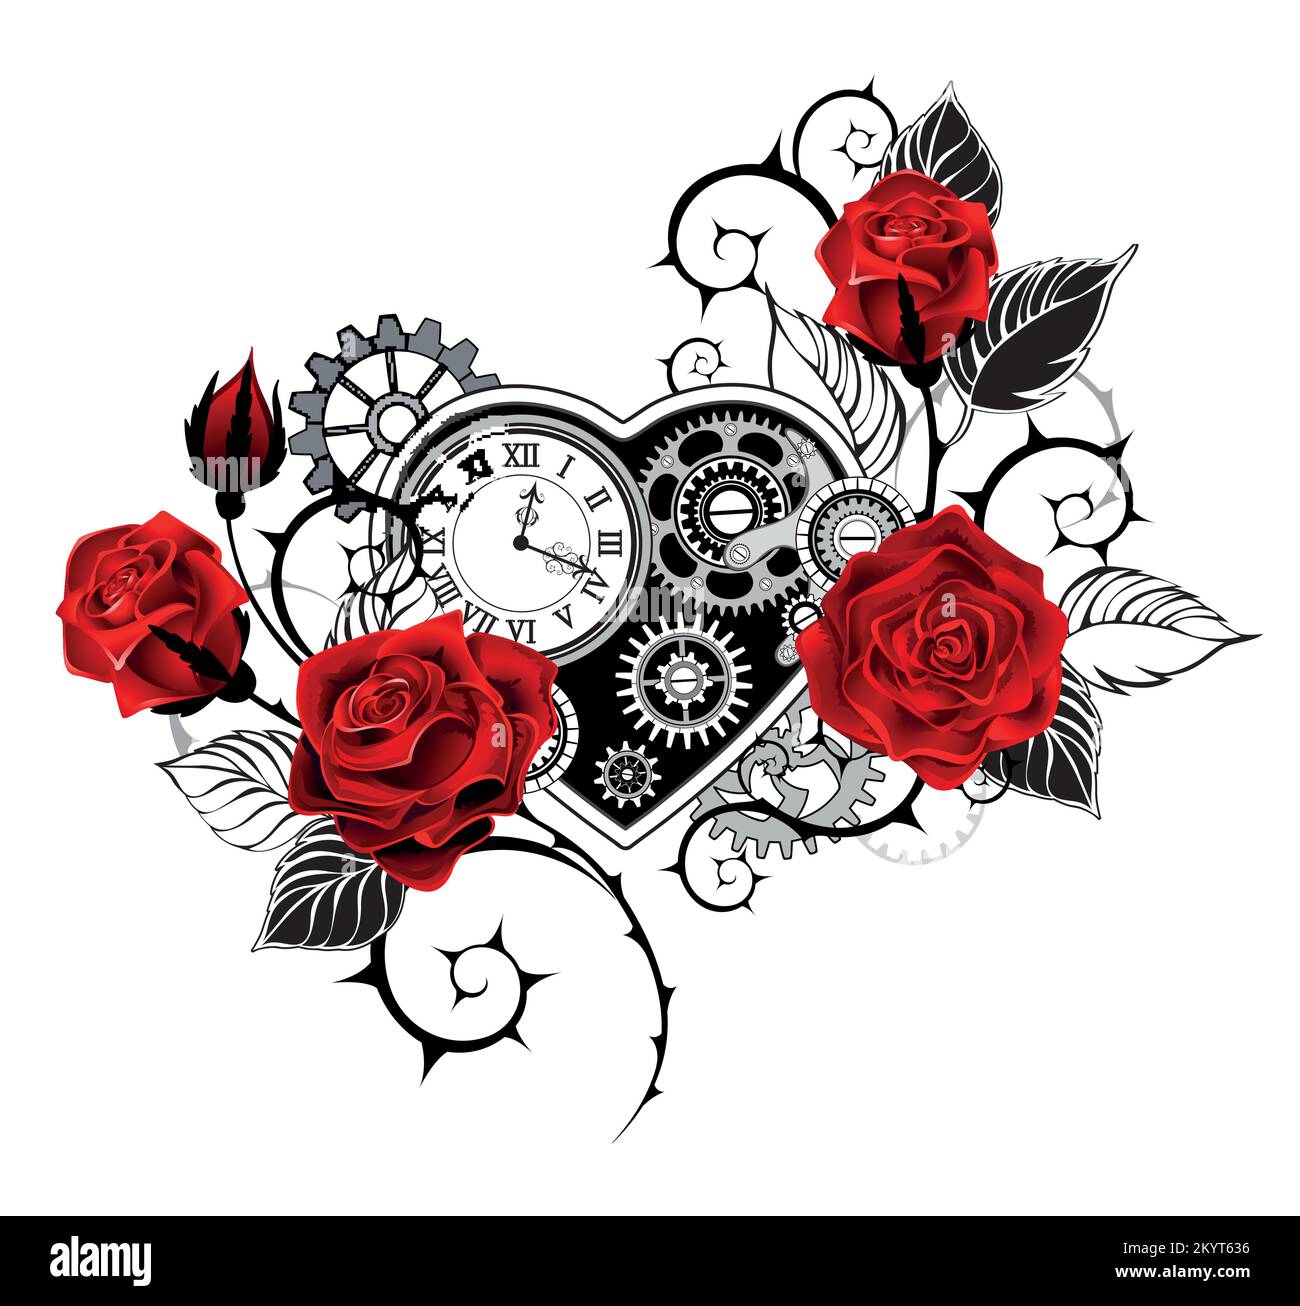 Artistically drawn, mechanical heart with an antique clock, decorated with red roses with black, spiky stems on white background. Steampunk style. Stock Vector